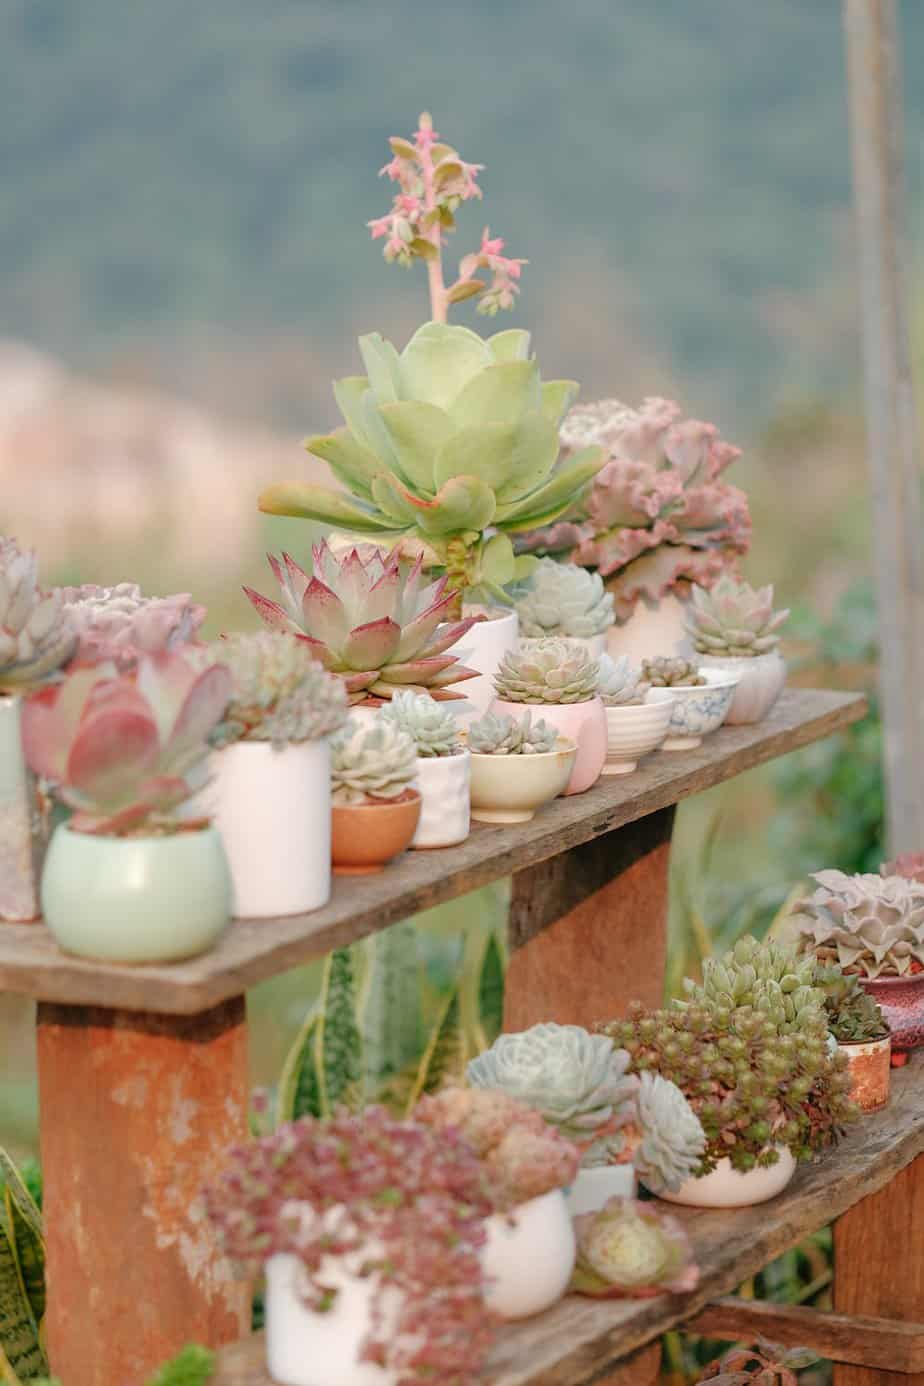 Potted succulents arranged on a rustic wooden bench.